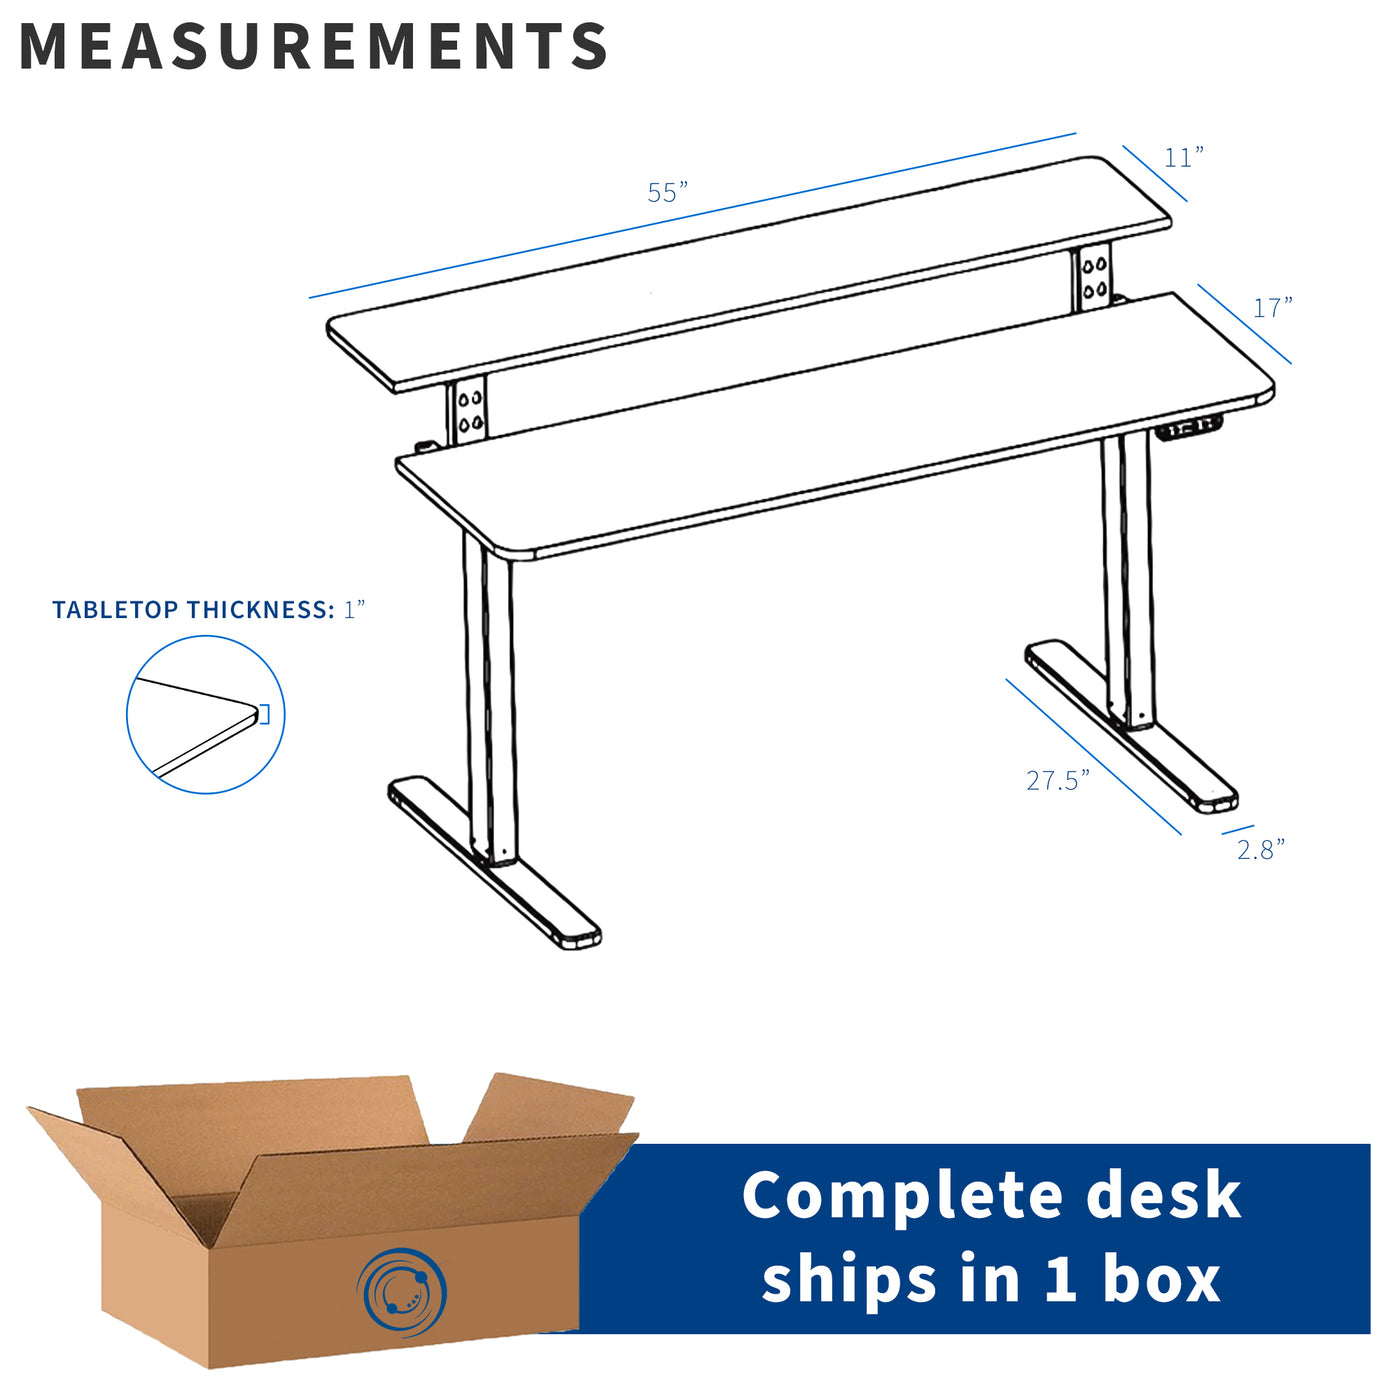  Desk ships in one box with minimal assembly required.